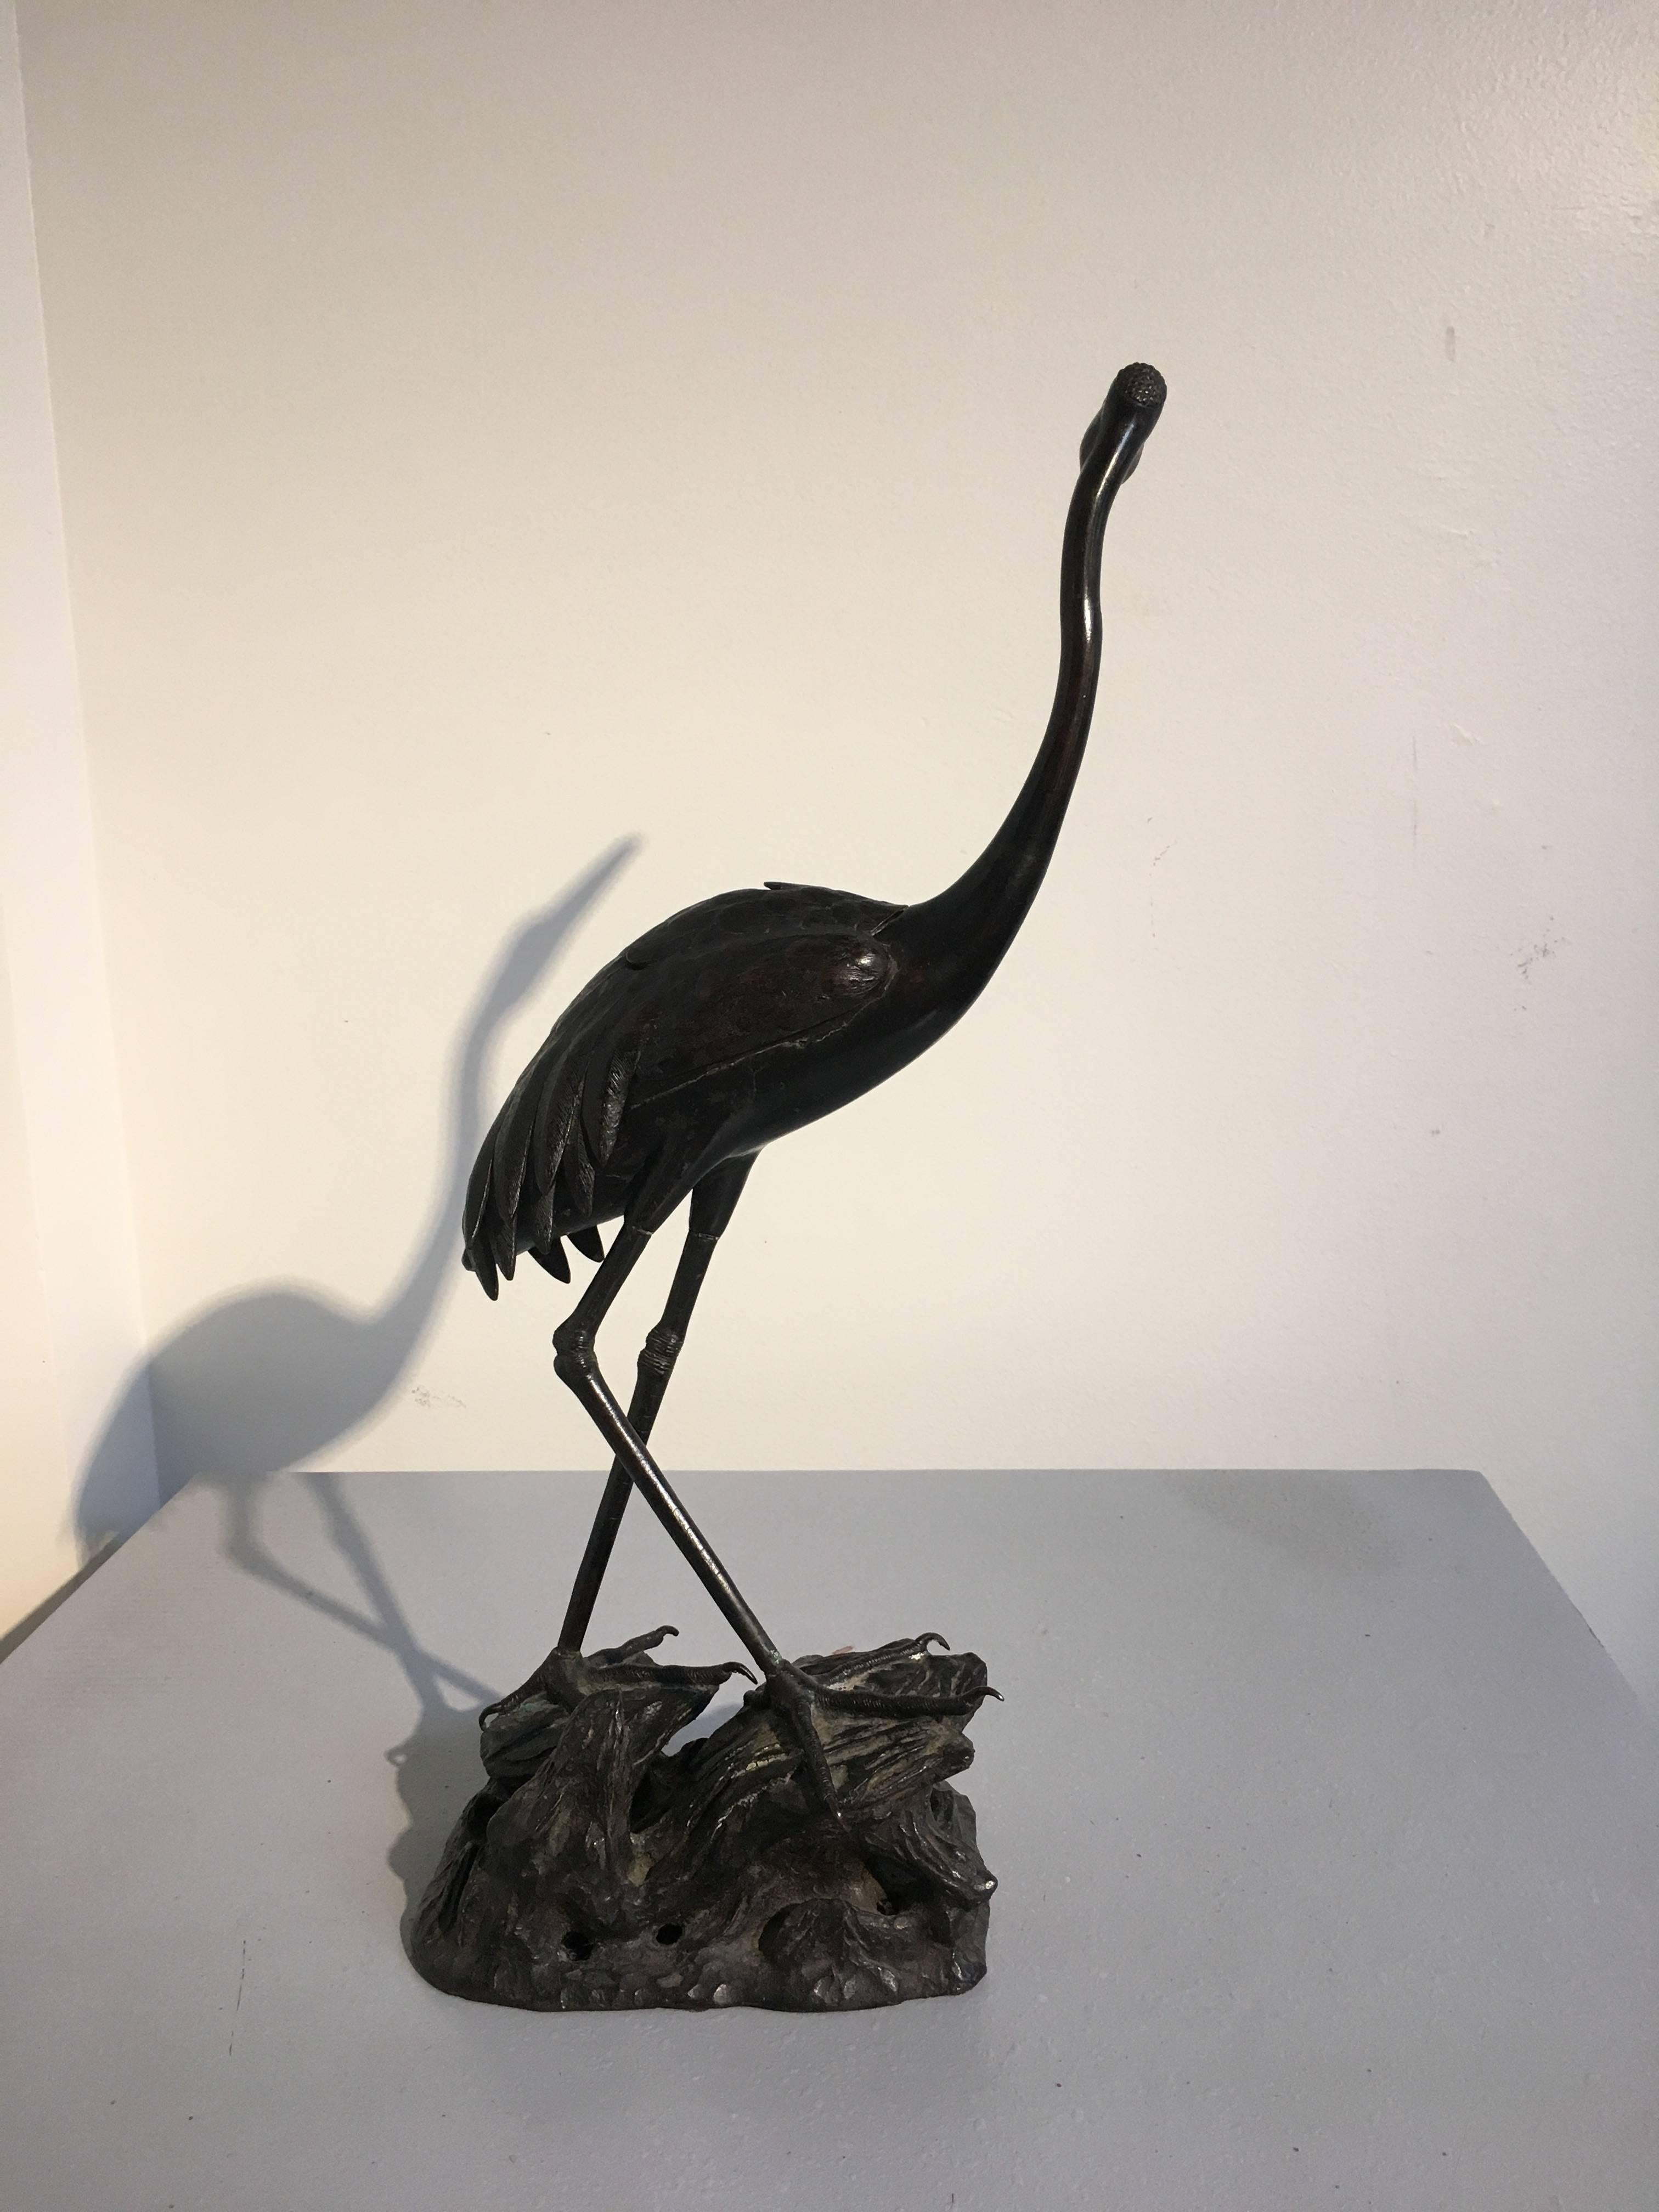 An unusual Chinese bronze censer in the form of a crane, Qing dynasty, late 19th century. 
The noble bird is portrayed with a strong sense of motion - standing in a walking stance upon a rocky outcrop with wings folded against its body, its long